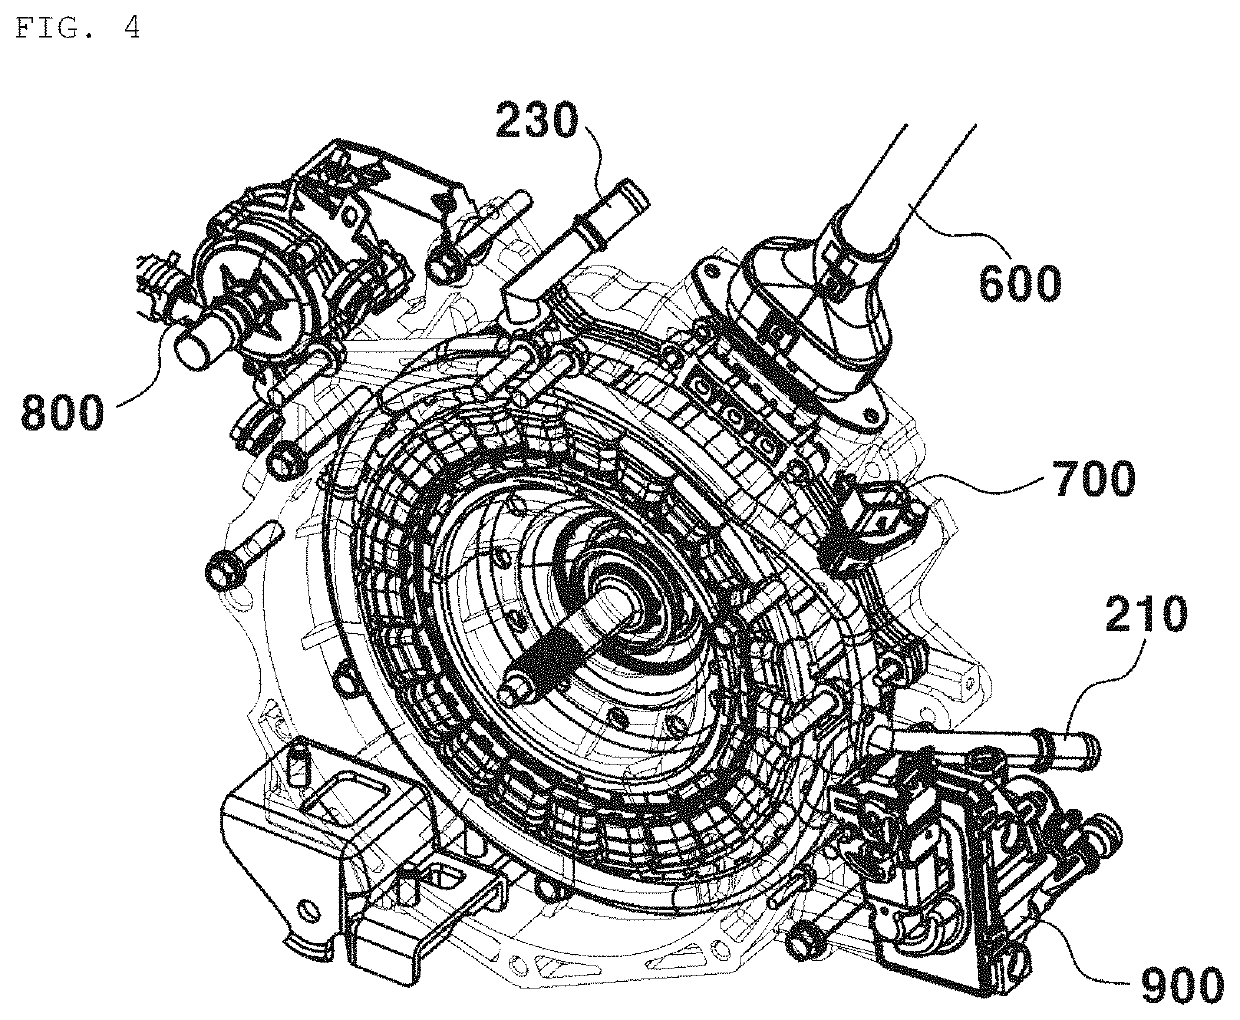 Motor housing with an integrated cooling passage